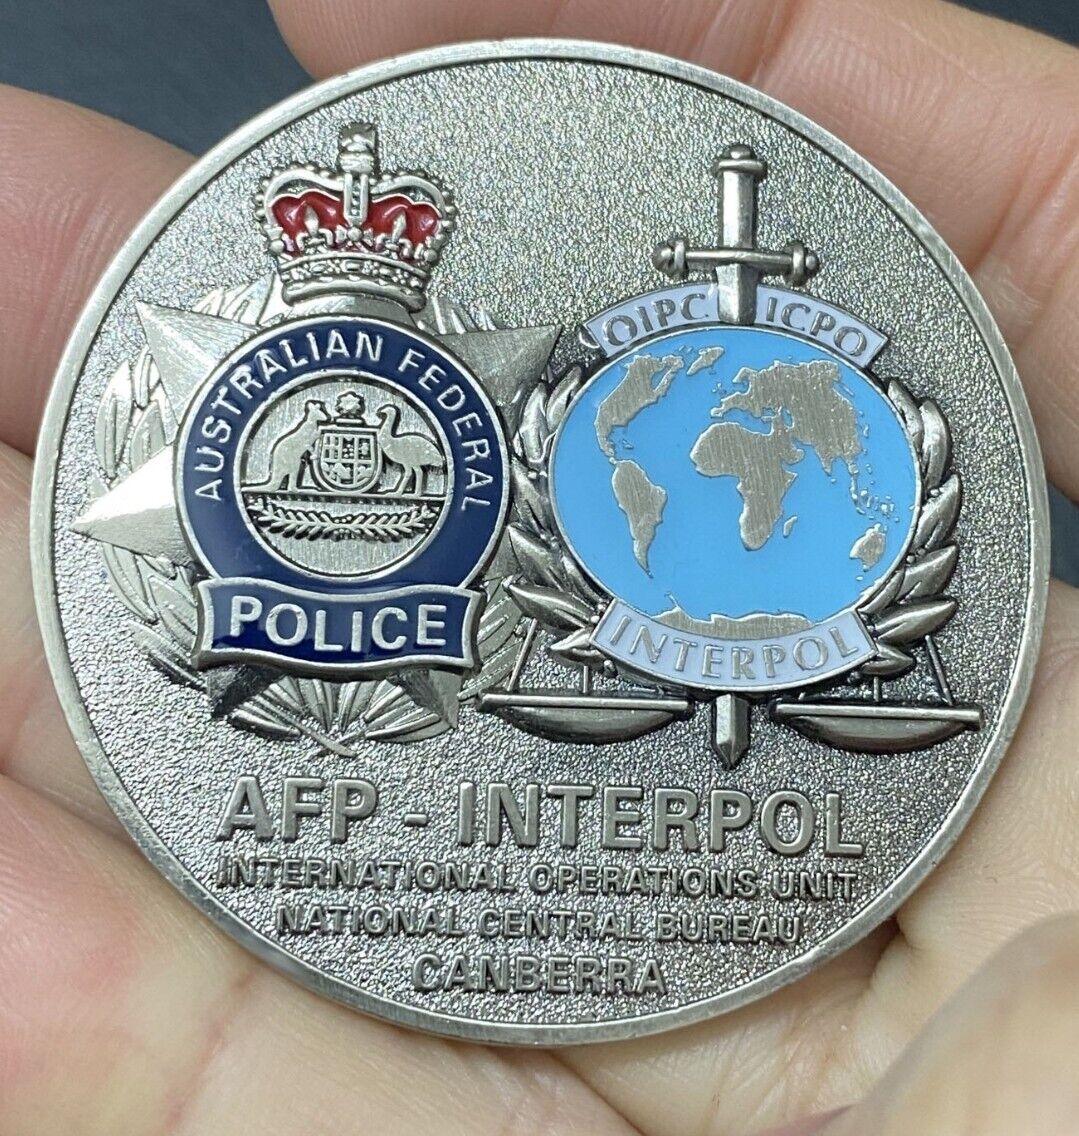 AFP Federal  Australian / INTERPOL  Coin not badge (Commonwealth)